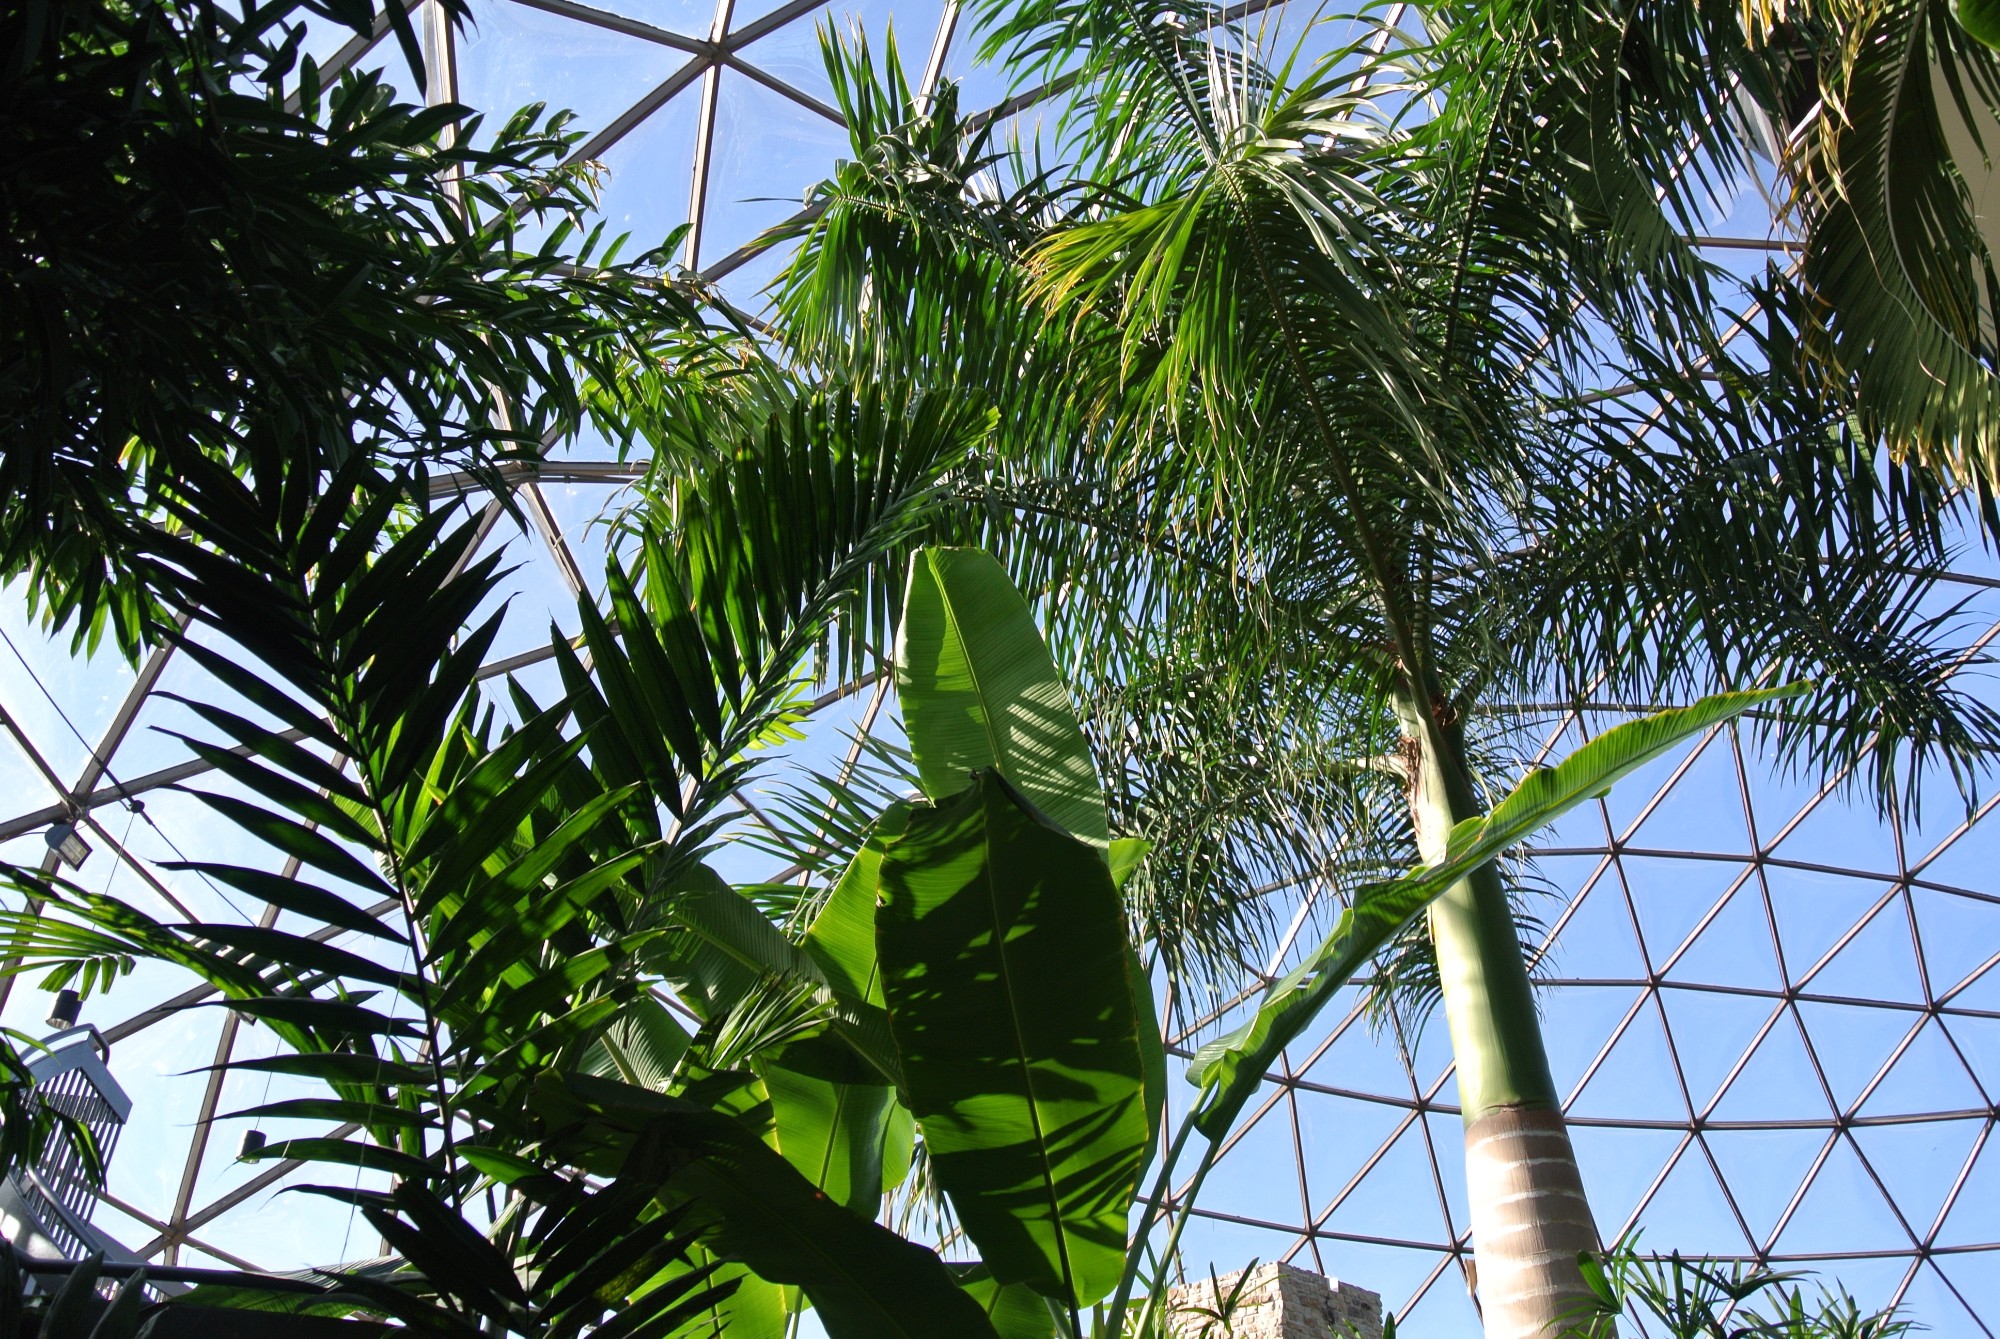 Canopy palms translate the architectural lines of the conservatory roof, November 2016.